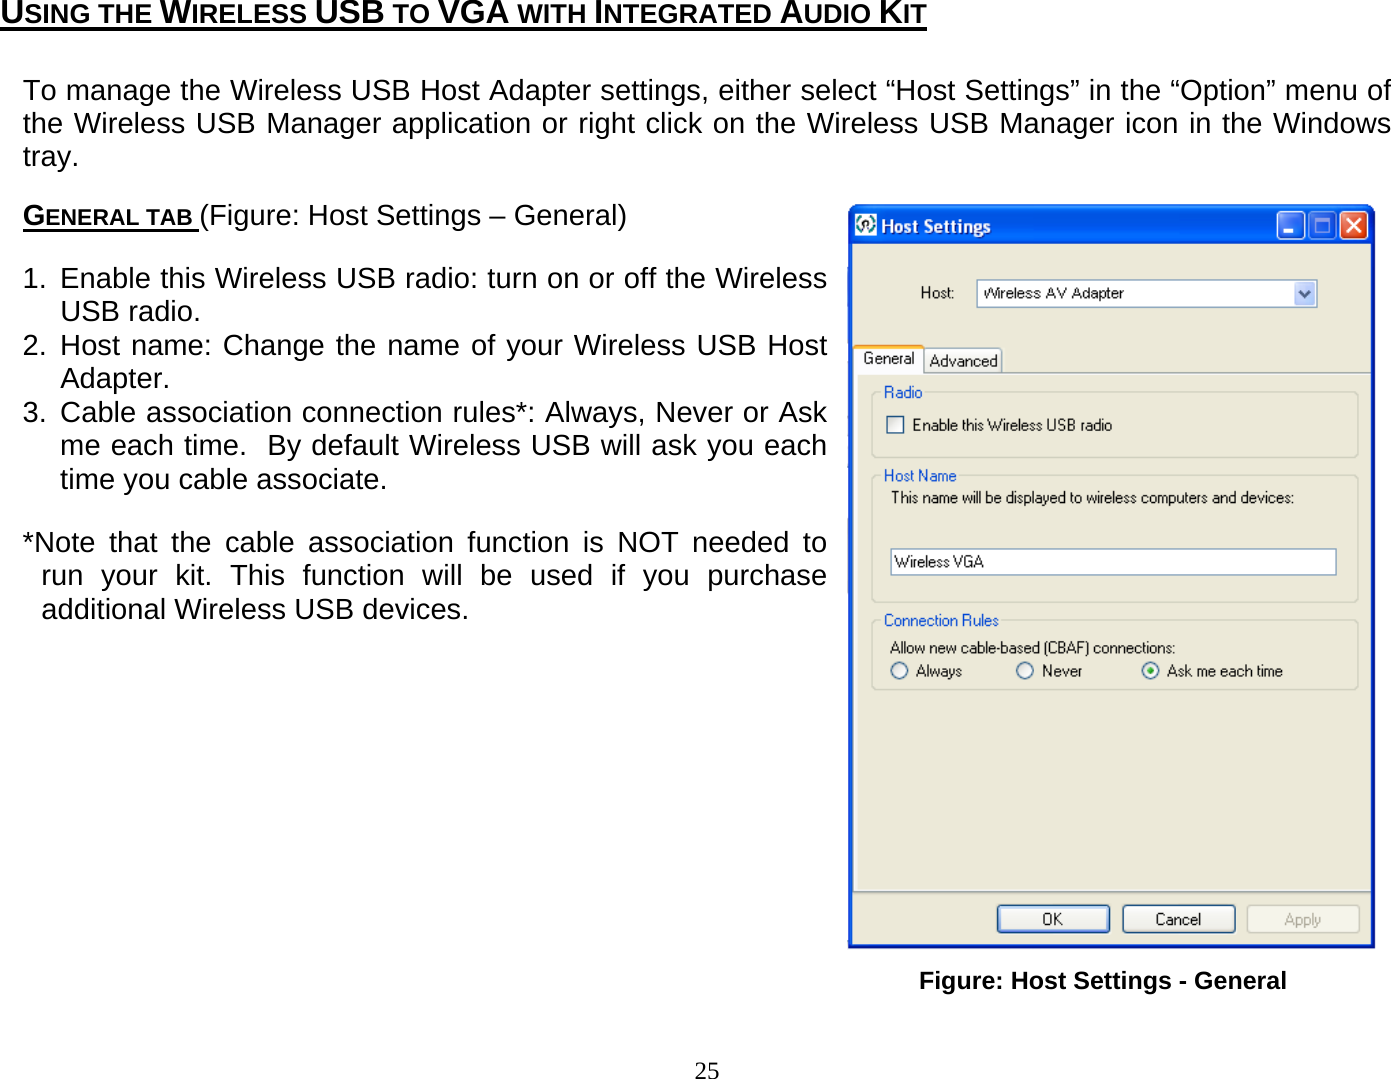 25 Figure: Host Settings - General To manage the Wireless USB Host Adapter settings, either select “Host Settings” in the “Option” menu of the Wireless USB Manager application or right click on the Wireless USB Manager icon in the Windows tray.  GENERAL TAB (Figure: Host Settings – General) 1. Enable this Wireless USB radio: turn on or off the Wireless USB radio. 2. Host name: Change the name of your Wireless USB Host Adapter. 3. Cable association connection rules*: Always, Never or Ask me each time.  By default Wireless USB will ask you each time you cable associate. *Note that the cable association function is NOT needed to run your kit. This function will be used if you purchase additional Wireless USB devices.            USING THE WIRELESS USB TO VGA WITH INTEGRATED AUDIO KIT 